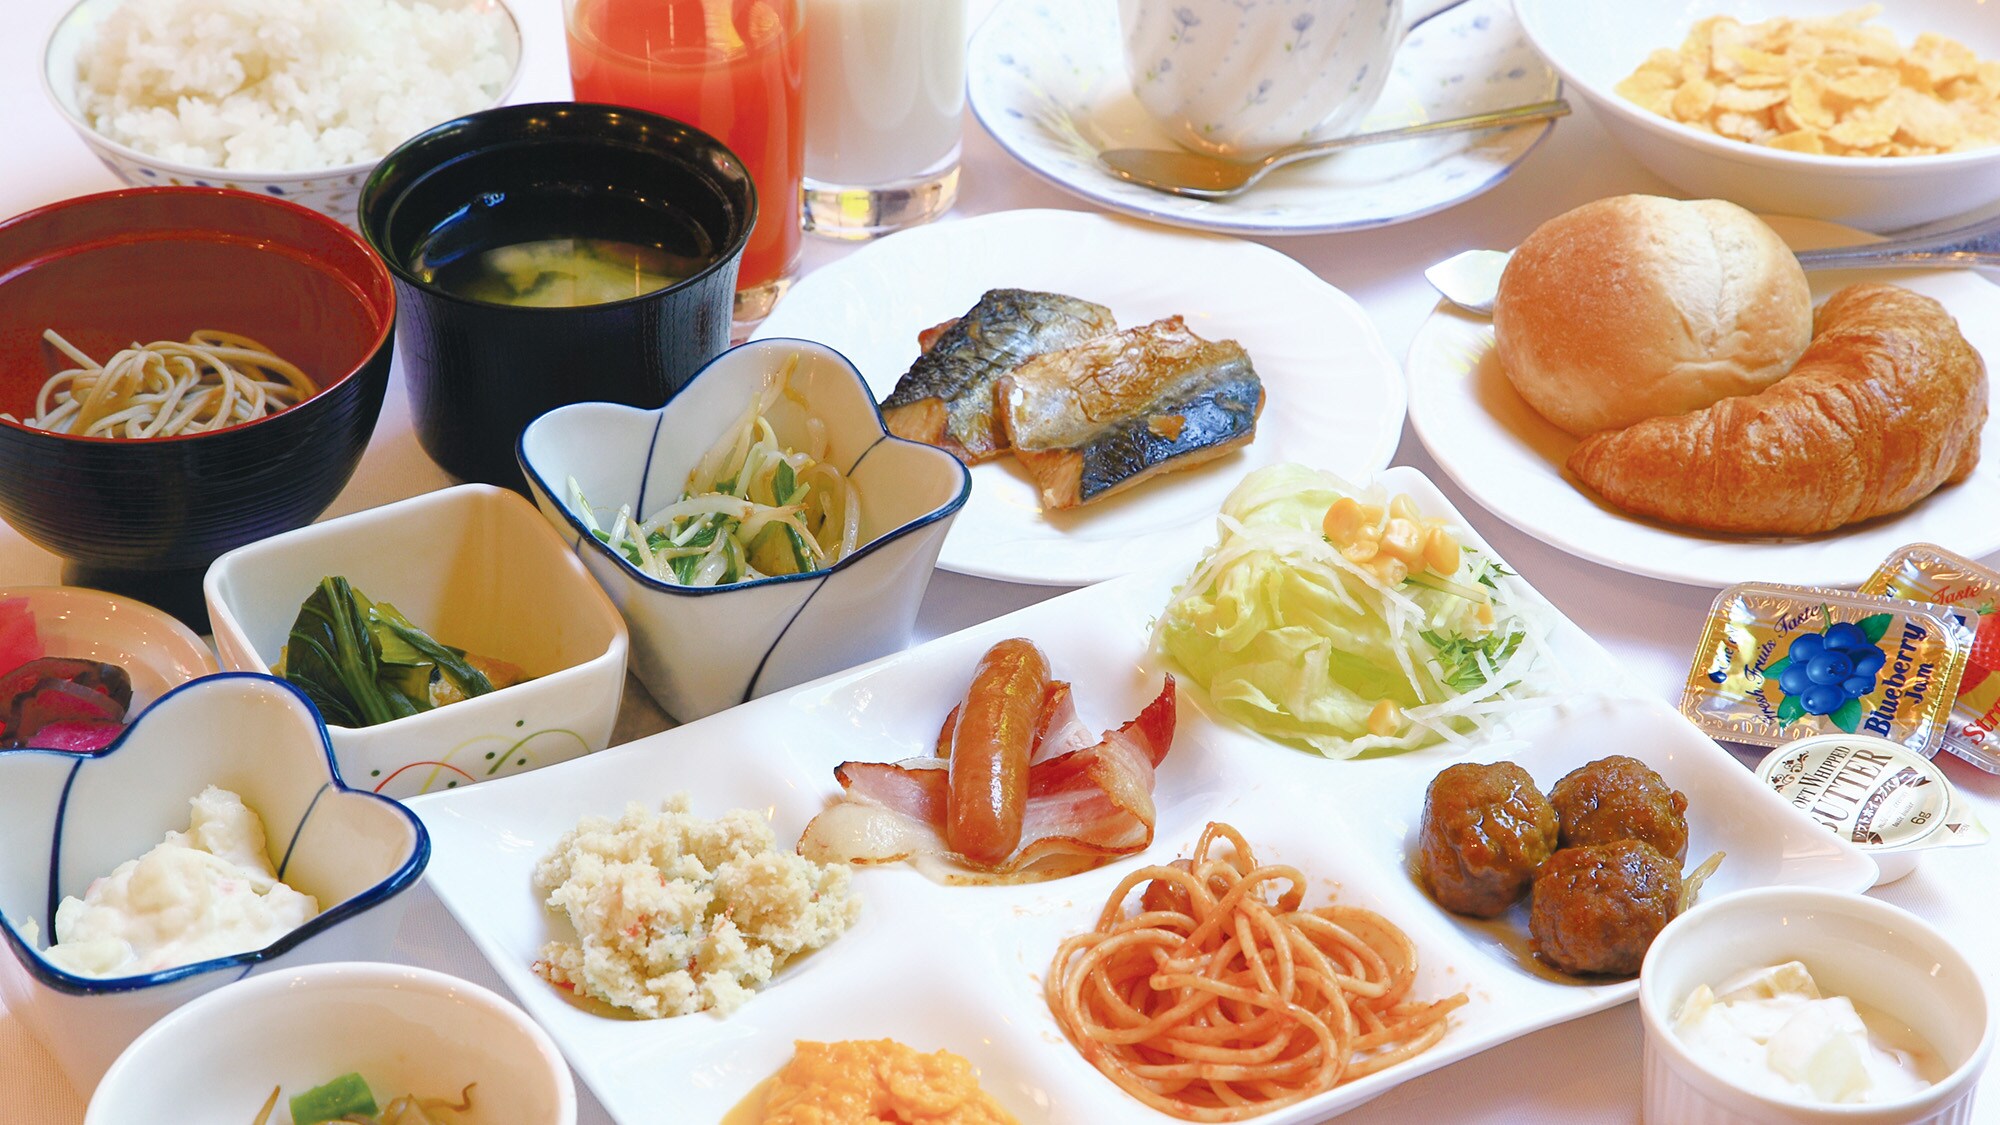 Free breakfast buffet is served from 6:00 in the morning ♪